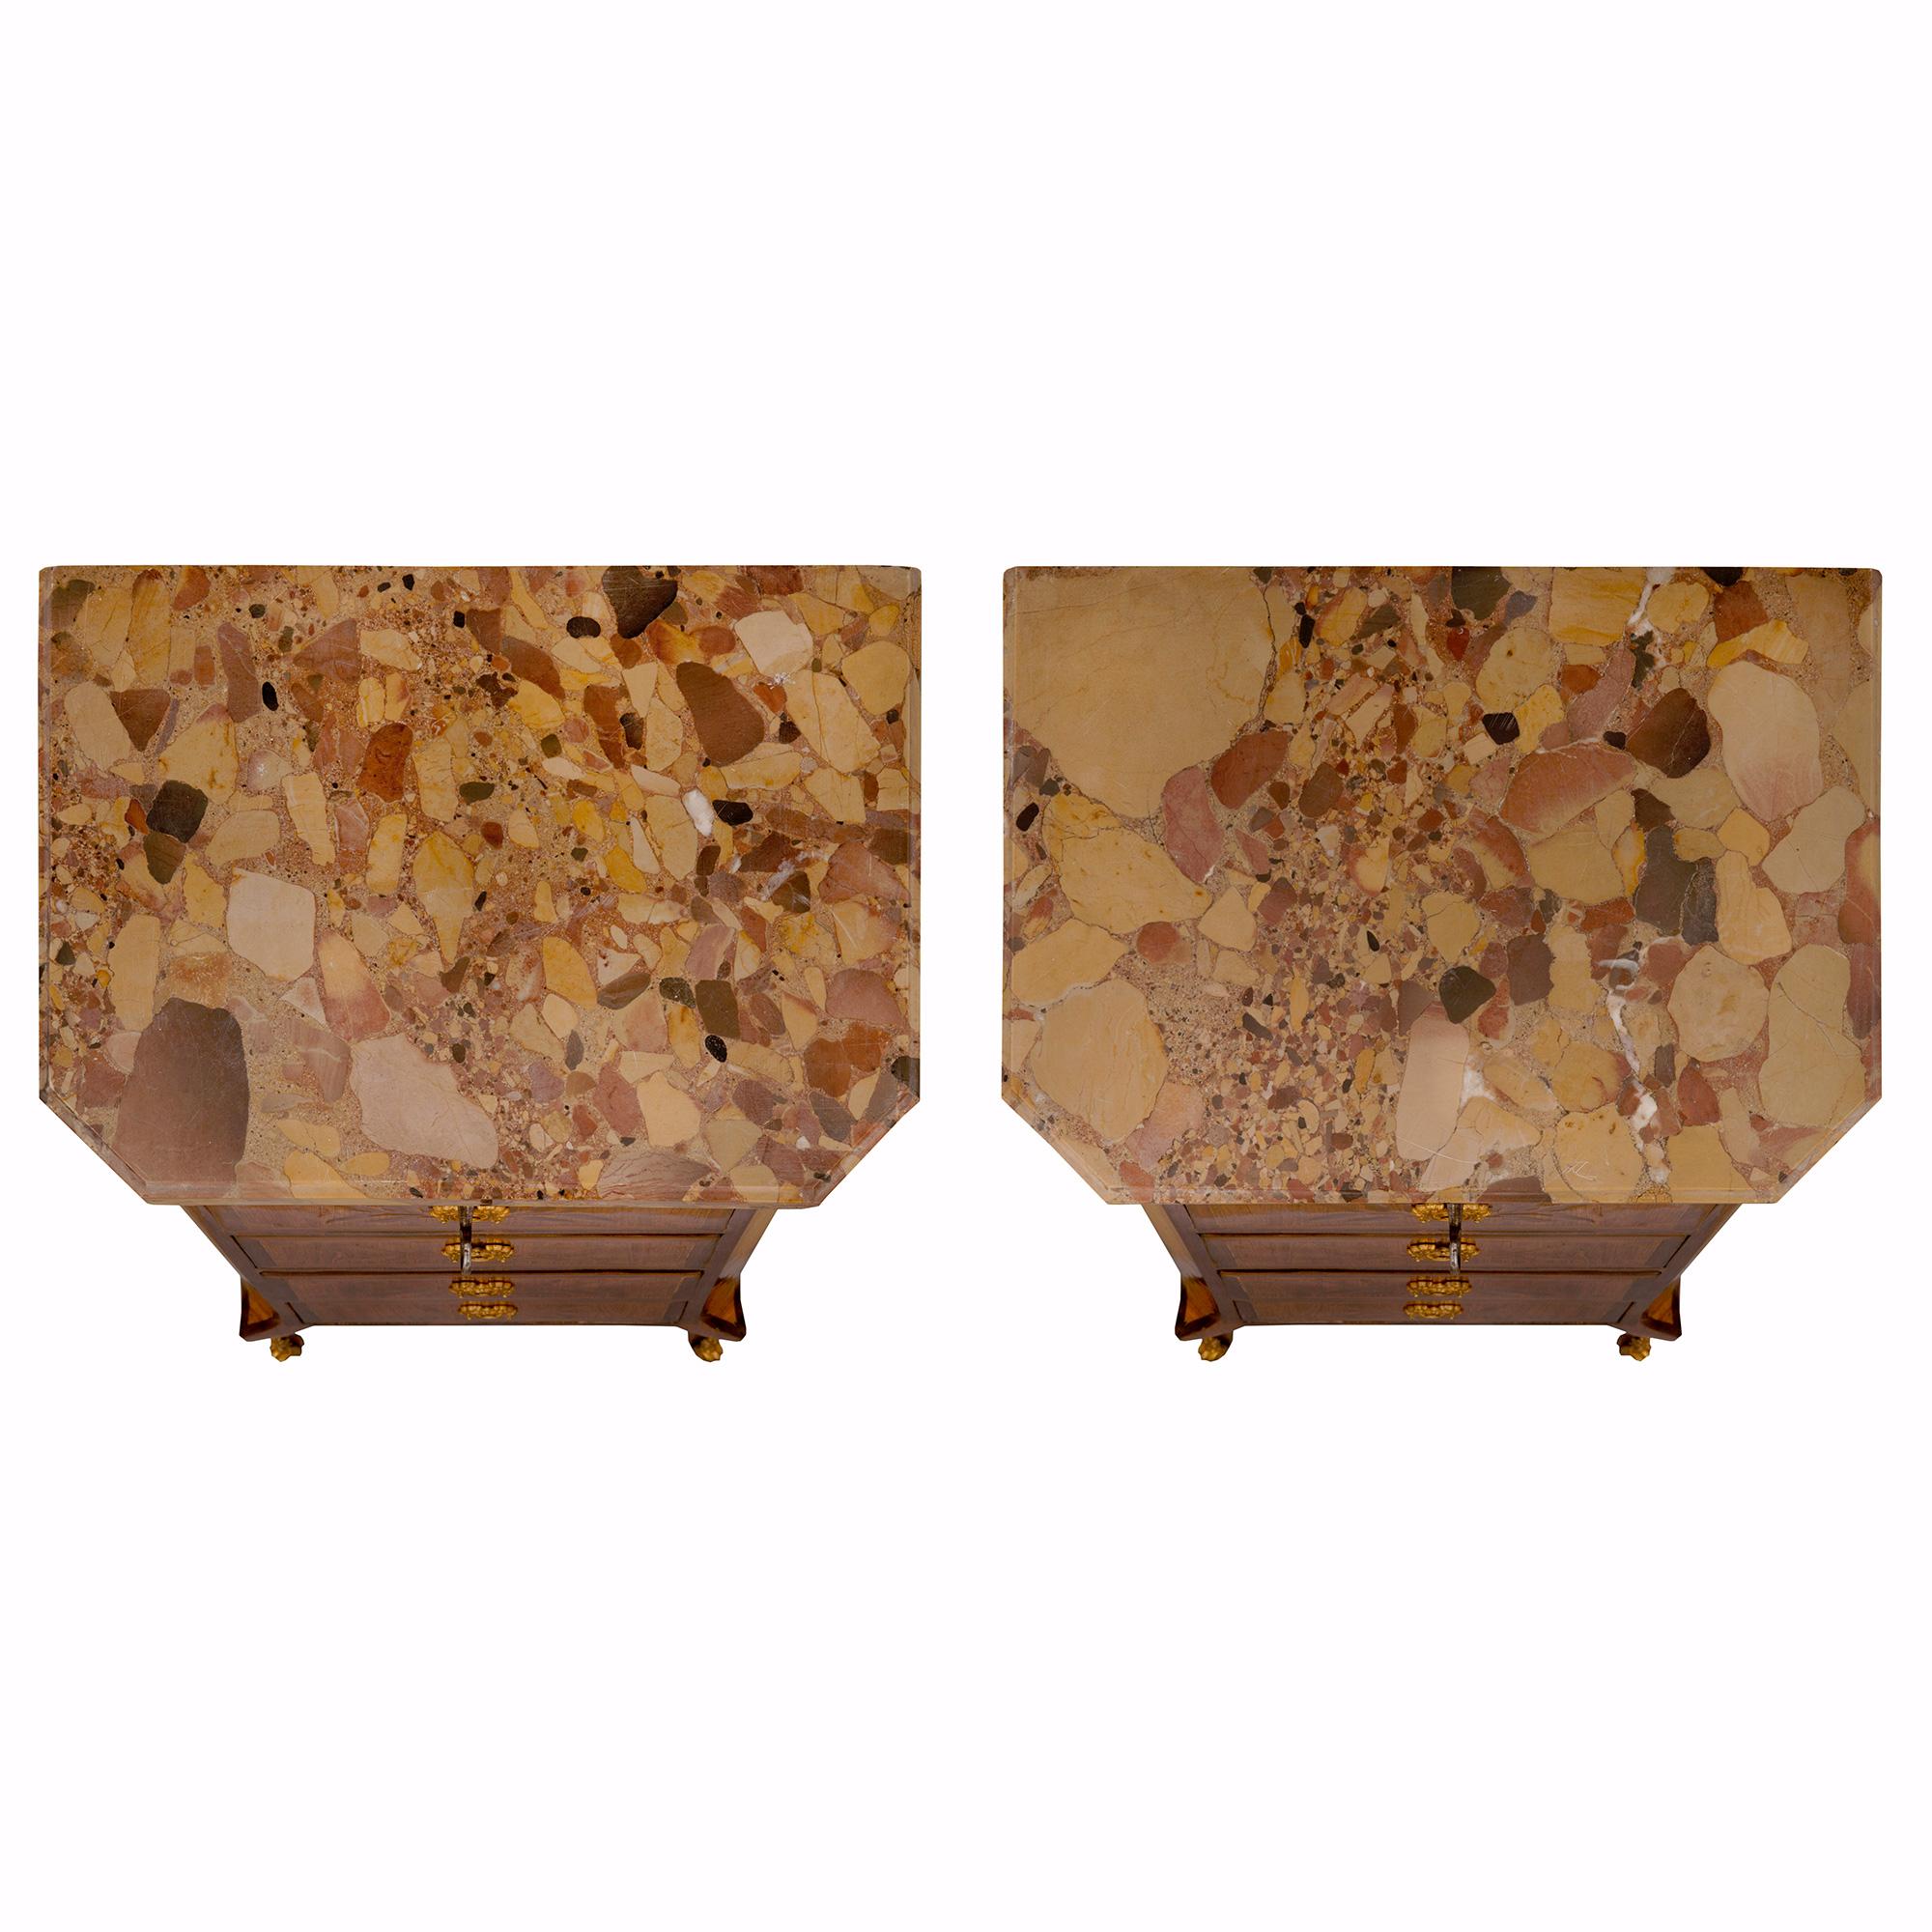 An elegant and small scale pair of French 19th century Transitional st. tulipwood, charmwood, ormolu and Brèche d'Alep marble chiffonier cabinets. Each five drawer cabinet is raised by fine cabriole legs with foliate ormolu sabots. At the center are